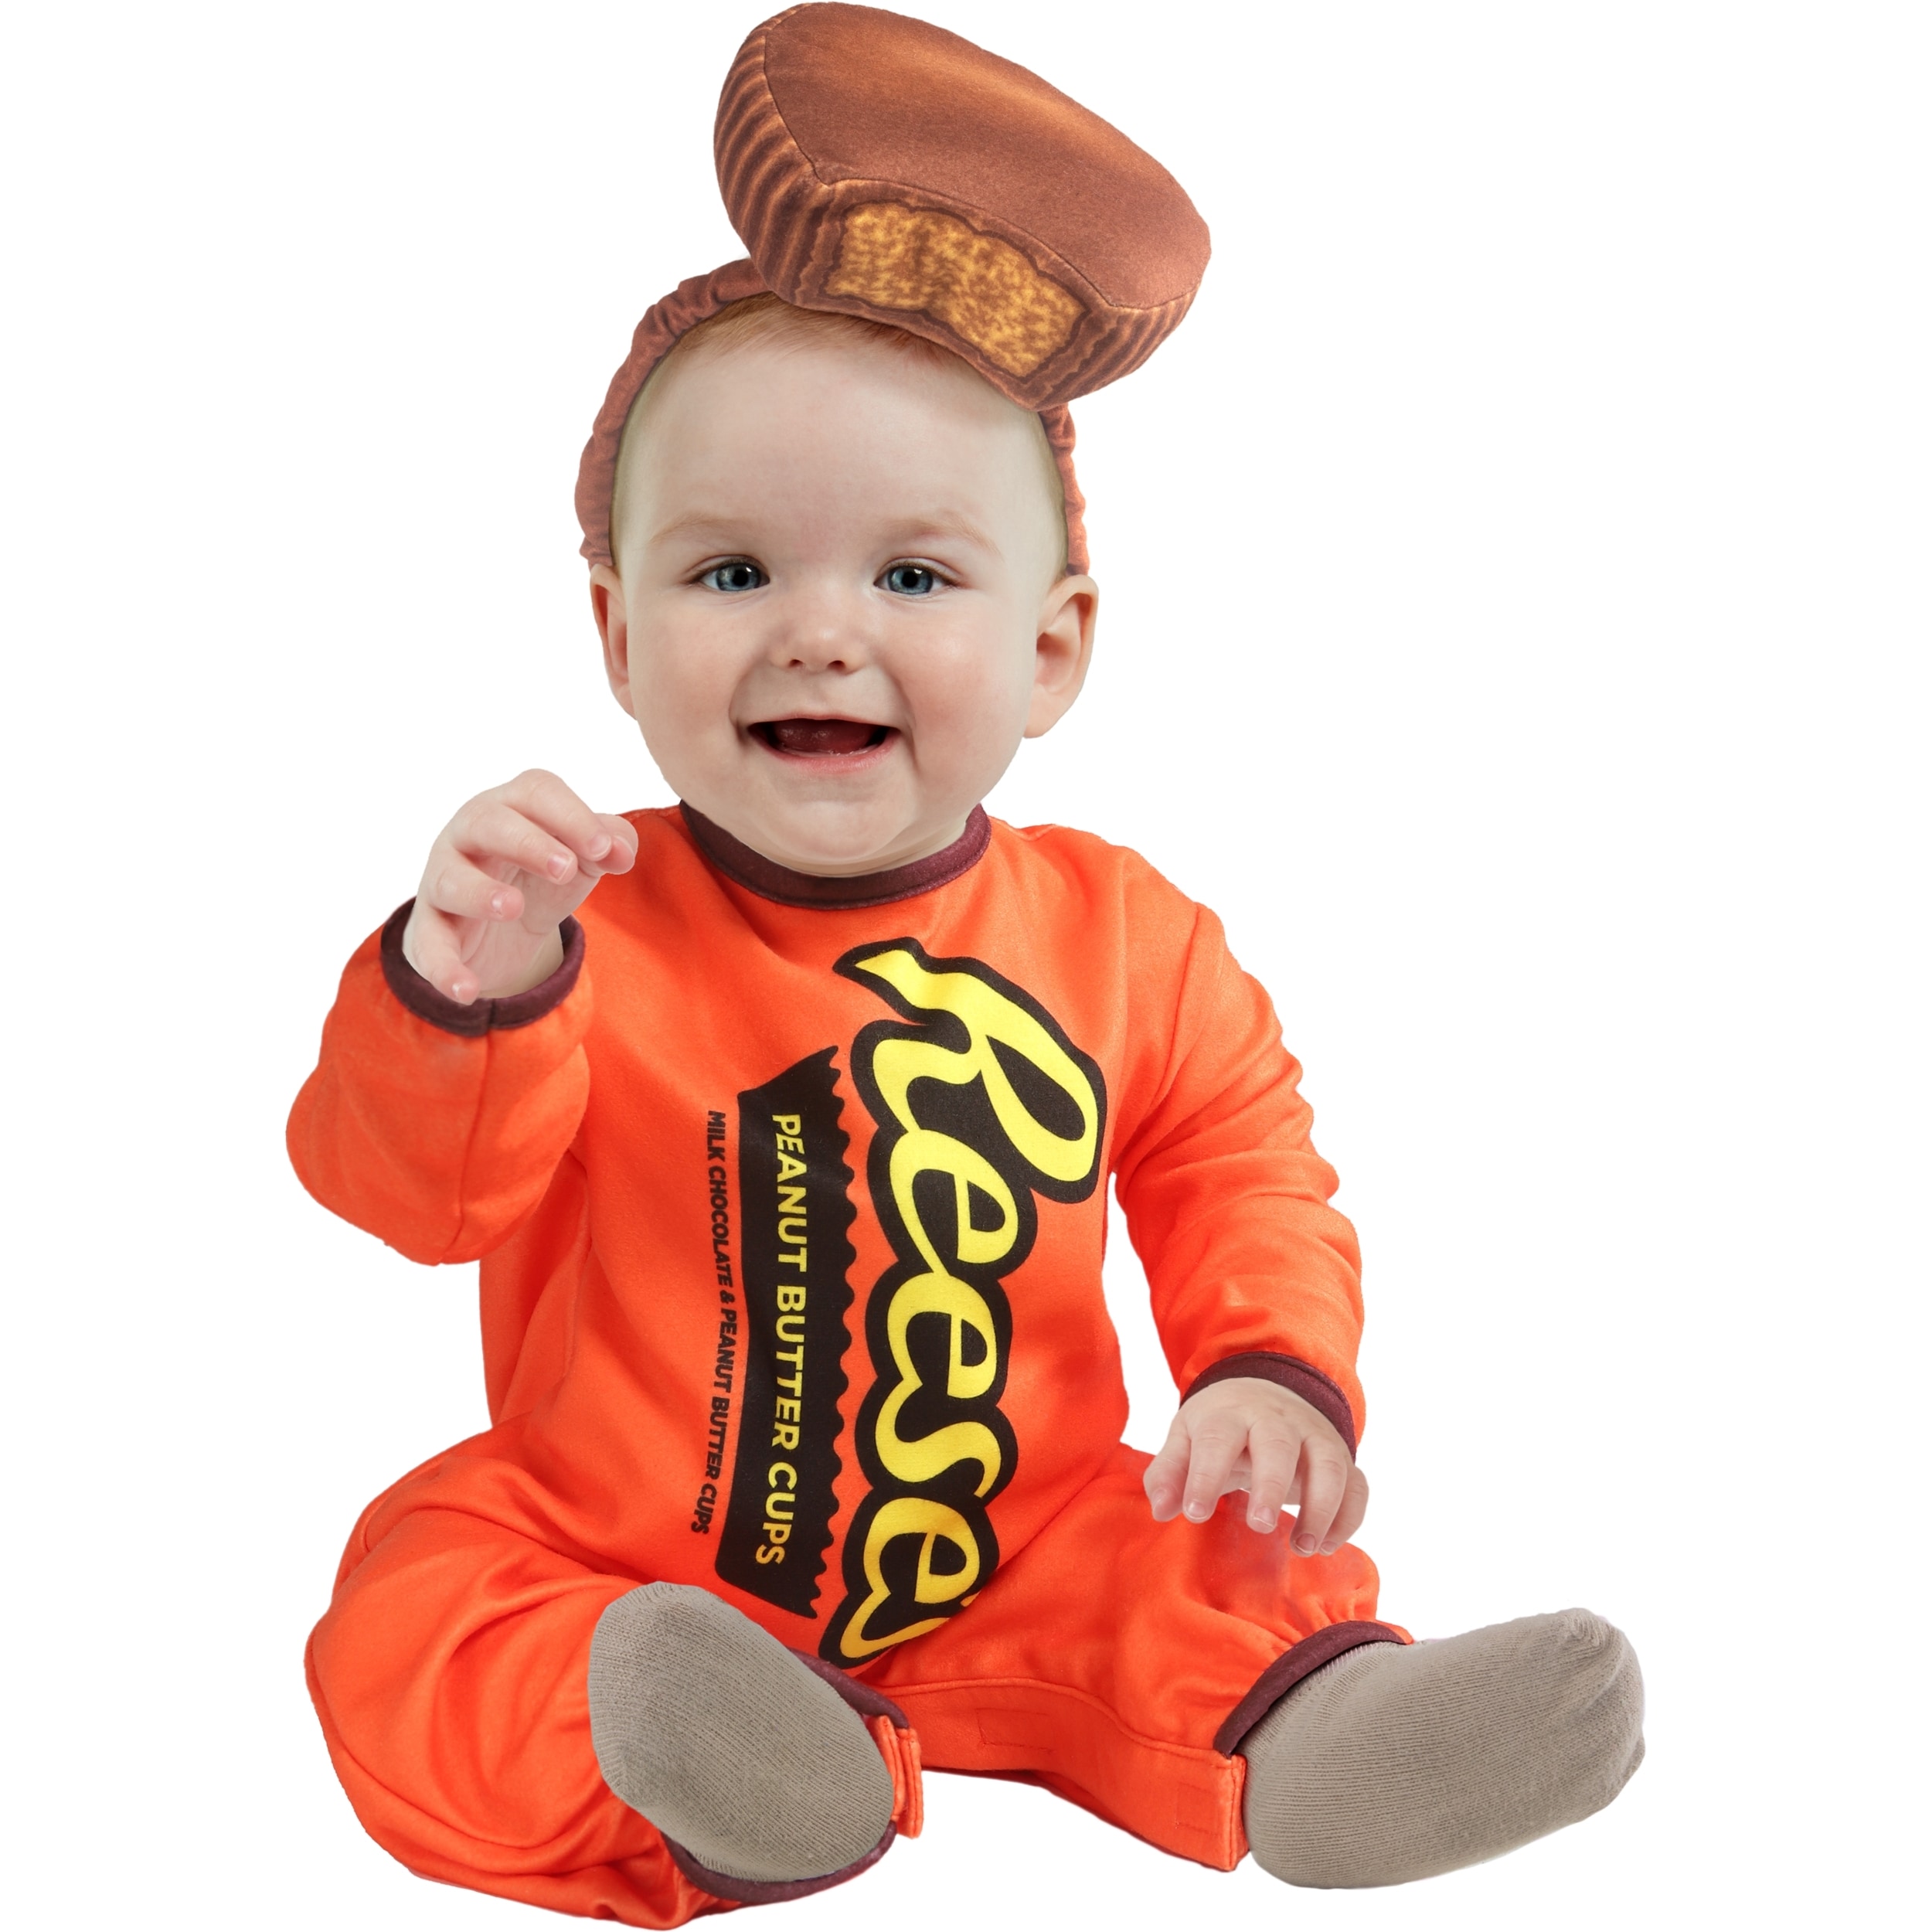 Rubie's Costumes Reese's Peanut Butter Cup Infant/Toddler Costume in ...